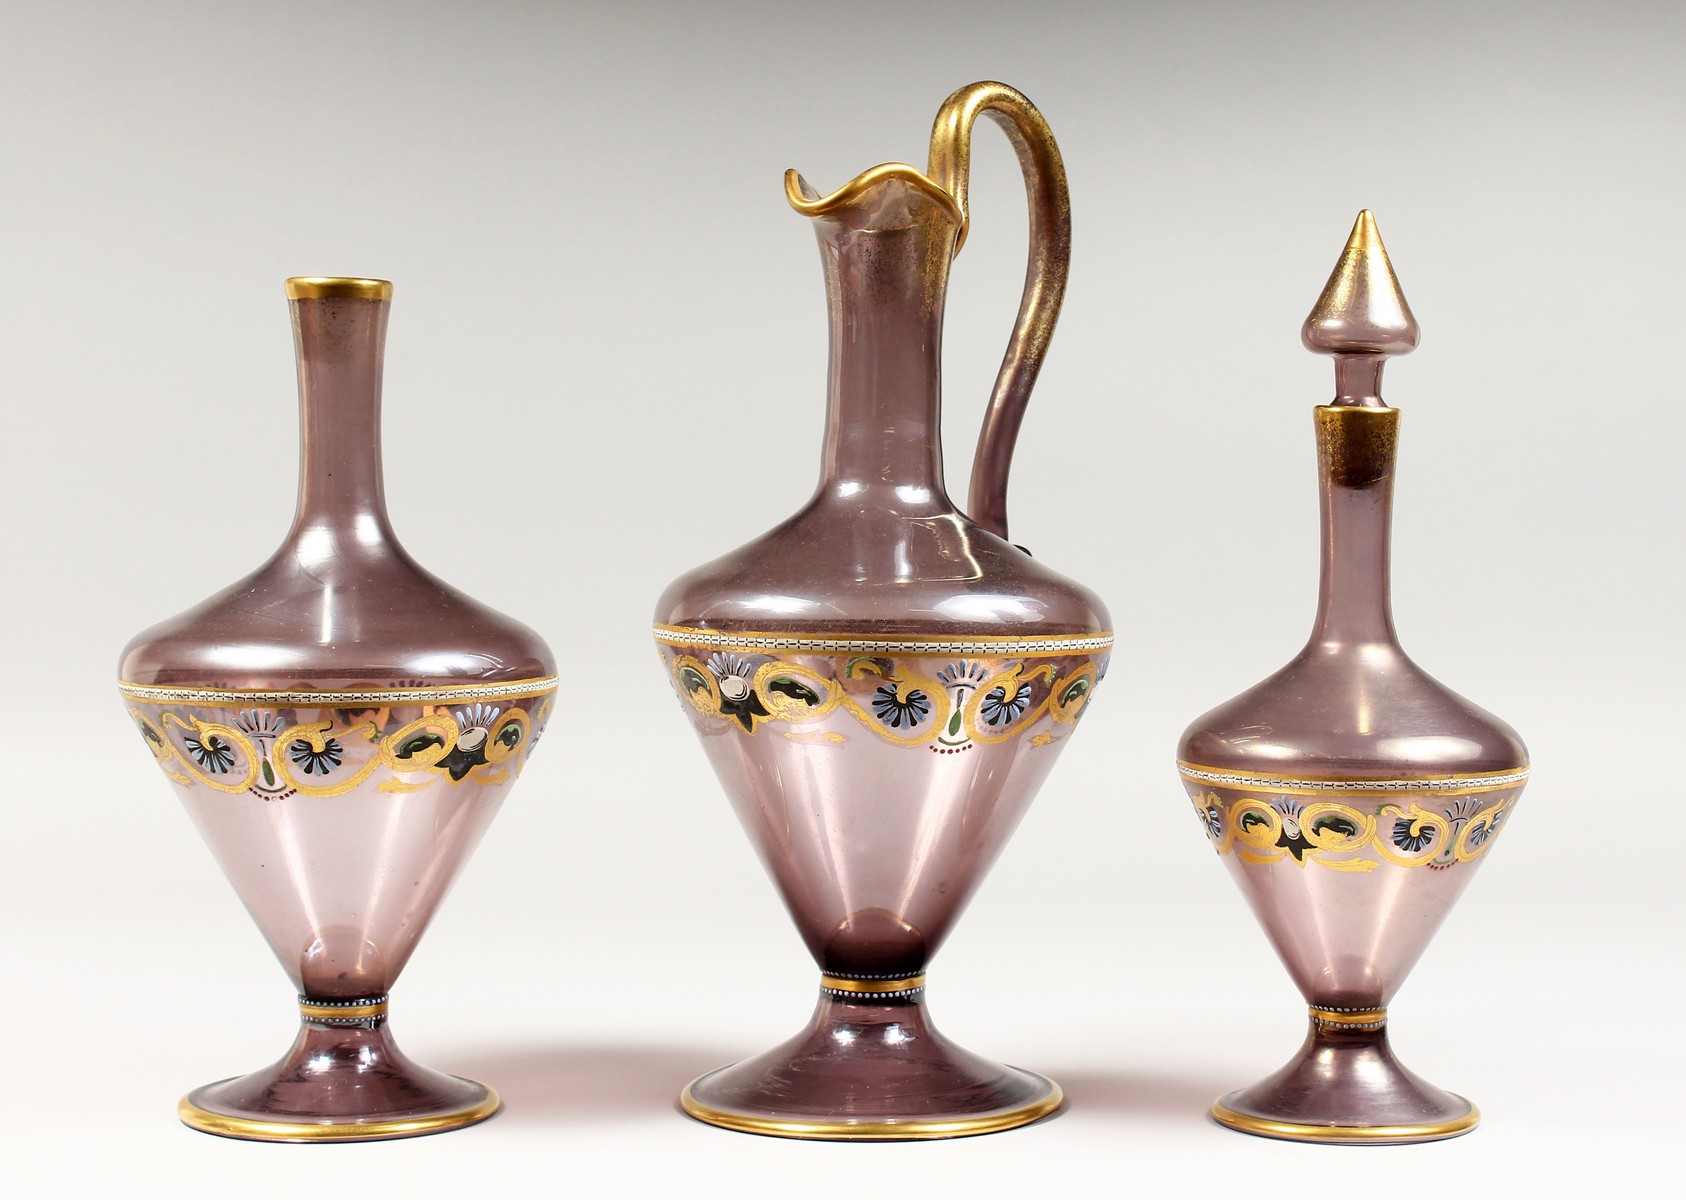 A VENETIAN AMETHYST TINTED GLASS EWER, with gilt and enamel decoration; together with the matching